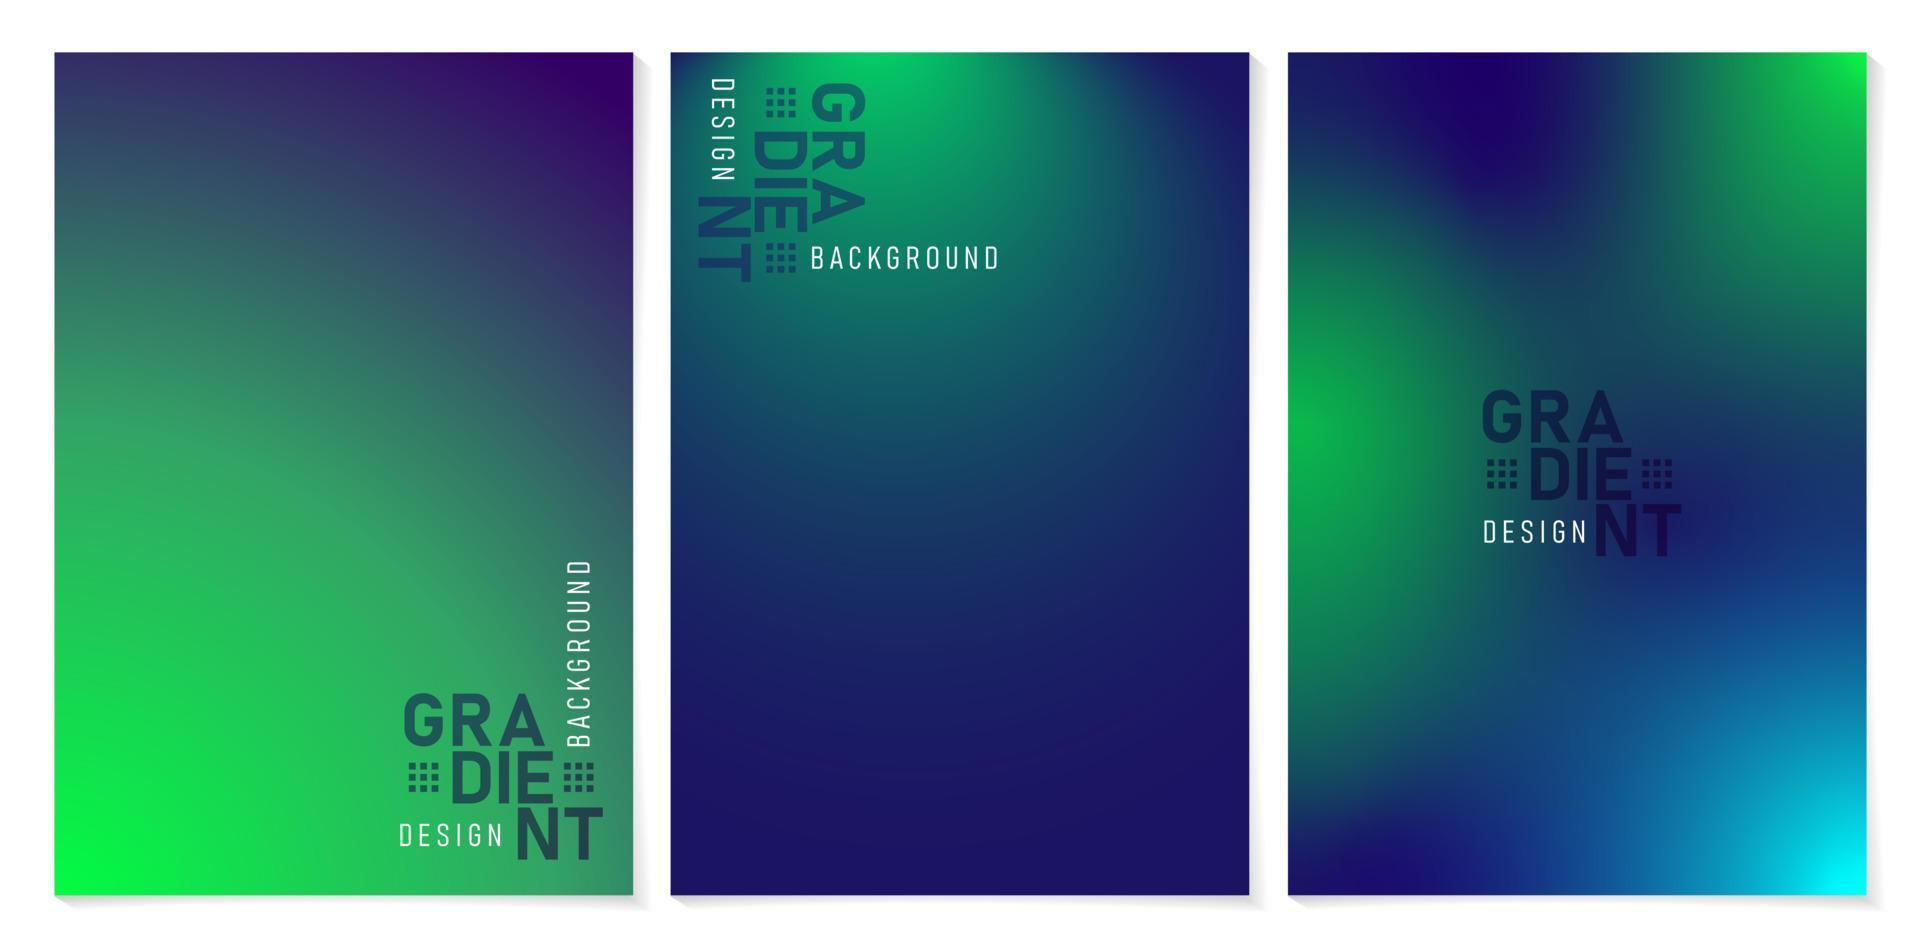 set of three banners with gradient green and dark blue backgrounds, applicable for website banner, web design template, sign, ads campaign, advertising, advertisement, social media posts, motion video vector